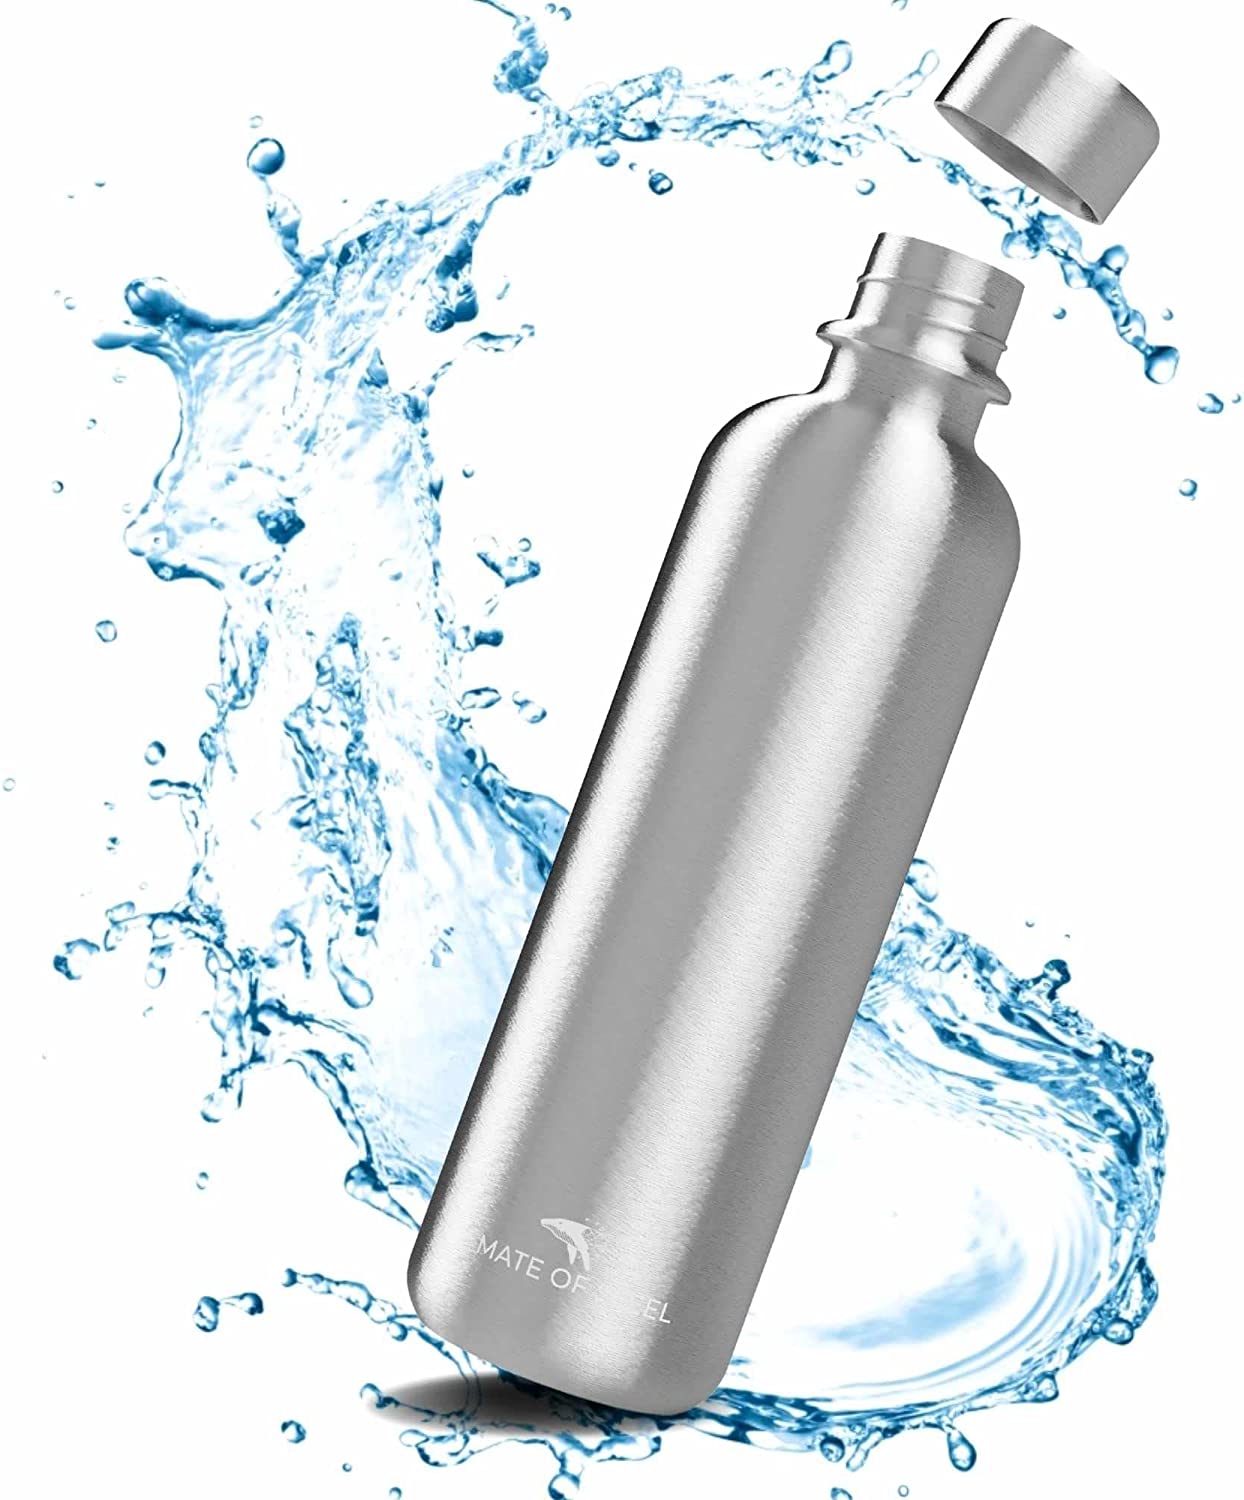 Mate of Steel 0.75 L Stainless Steel Bottle, Compatible with Sodastream Crystal & Easy - Dishwasher Safe, Carbonated Safe | 750 ml Metal Drinking Bottle | Soda Bottles | Replacement Bottles